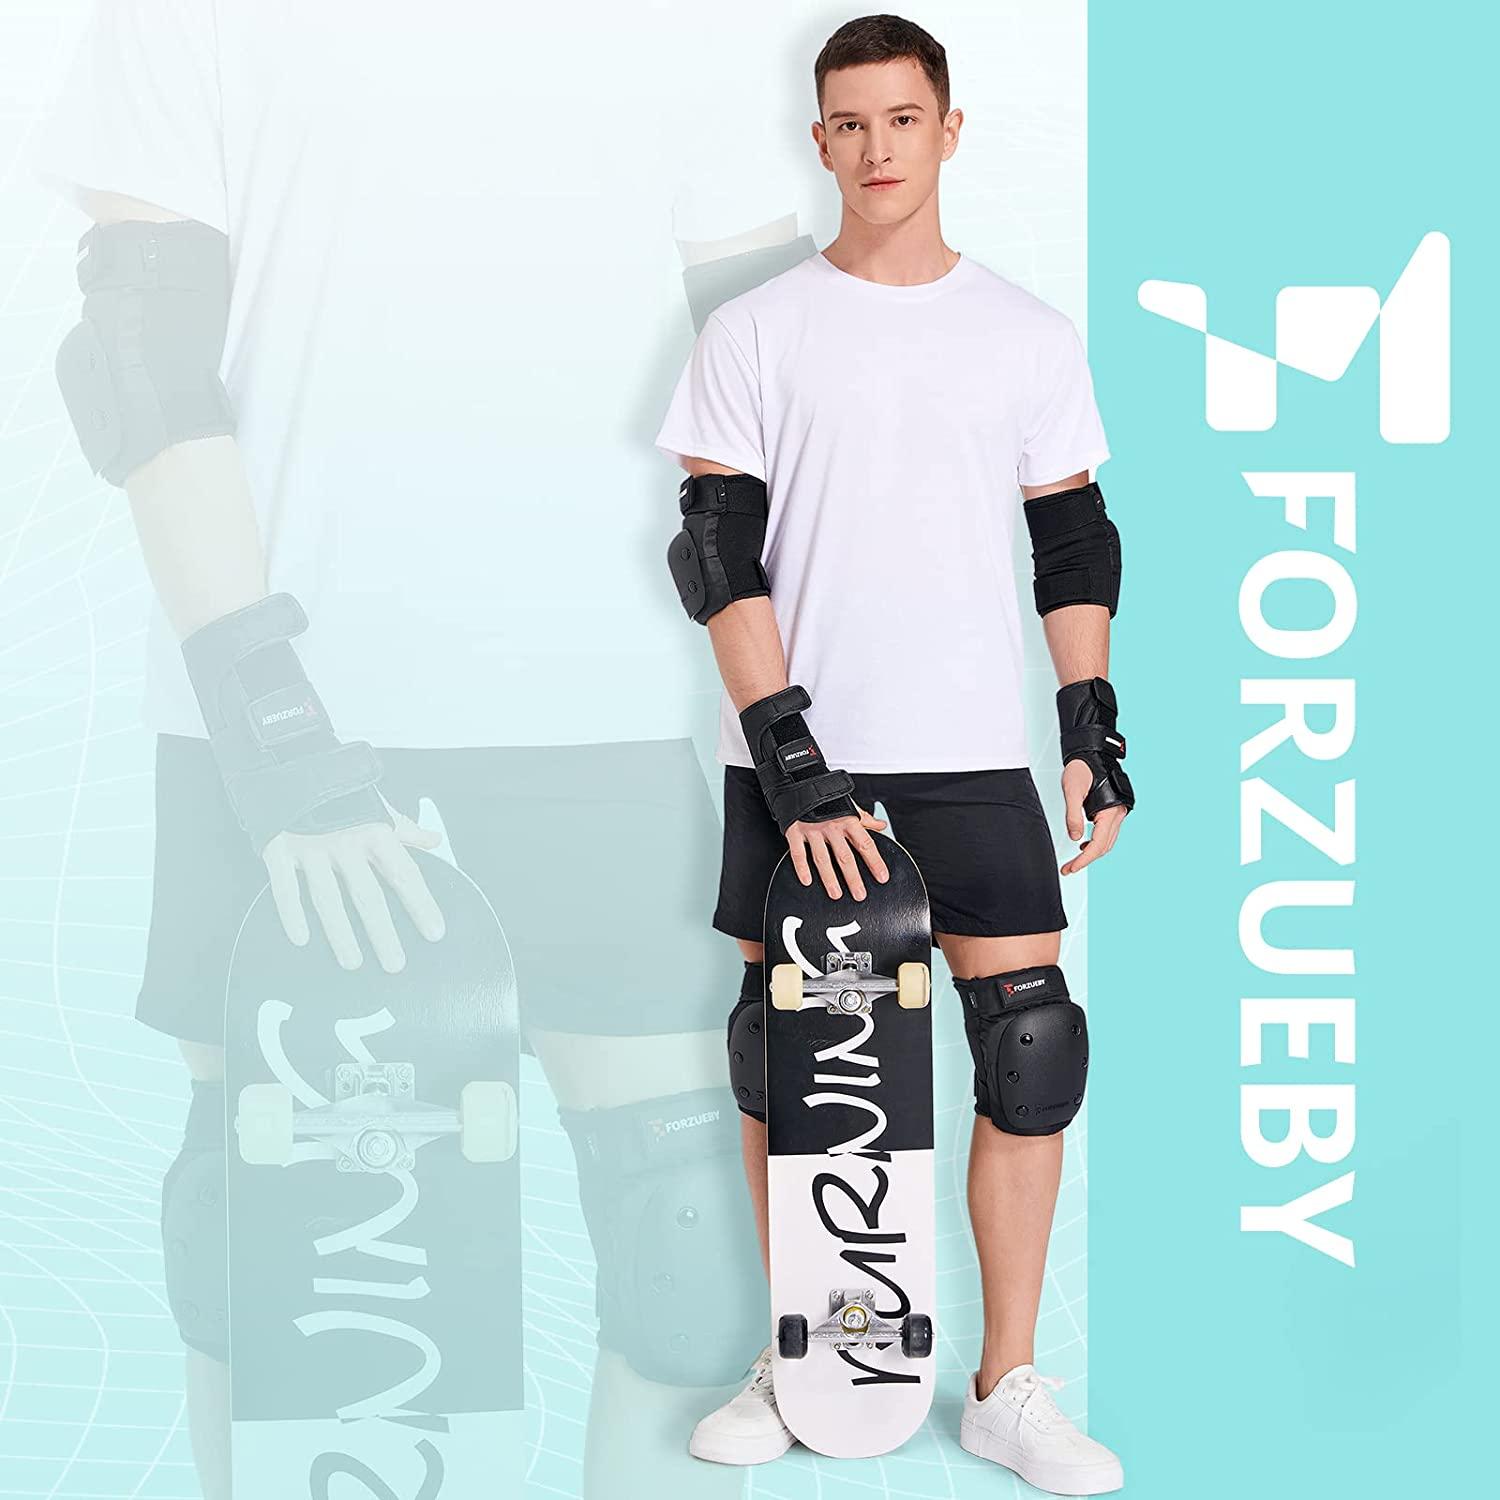 Skate Protective Gear Set, 6 In 1 Knee Pads Elbow Pads Wrist